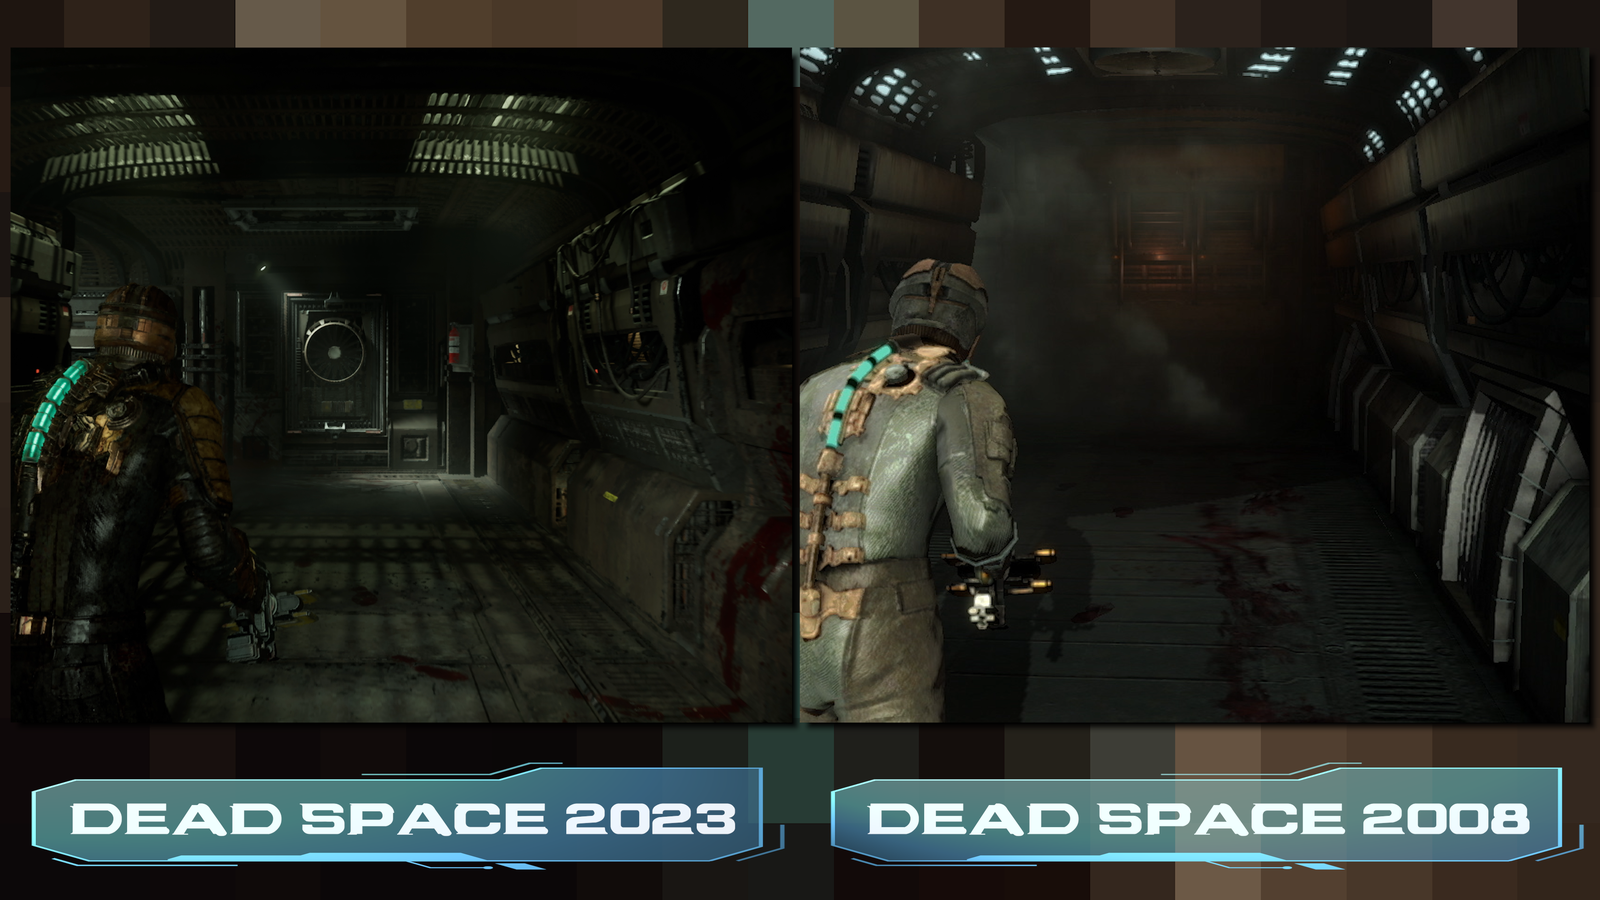 More Details on the Dead Space Remake Shared by PlayStation